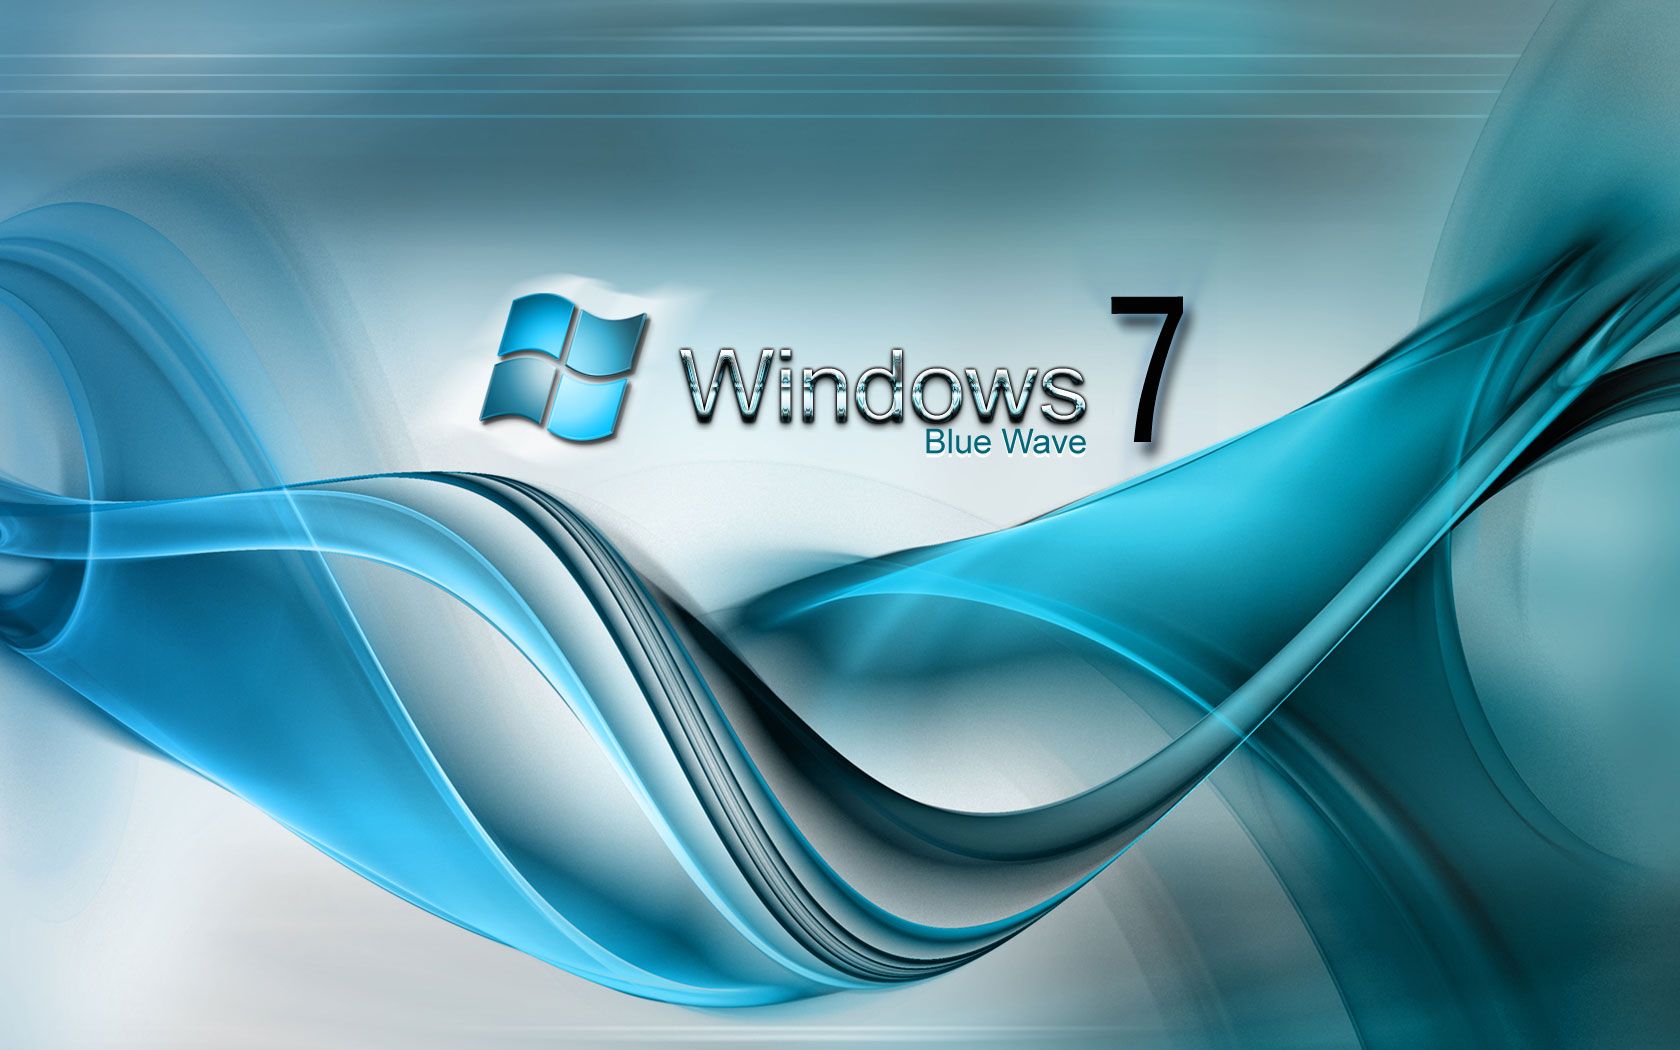 Free download 3D Animated Wallpaper for Windows 7 Computer Wallpapers